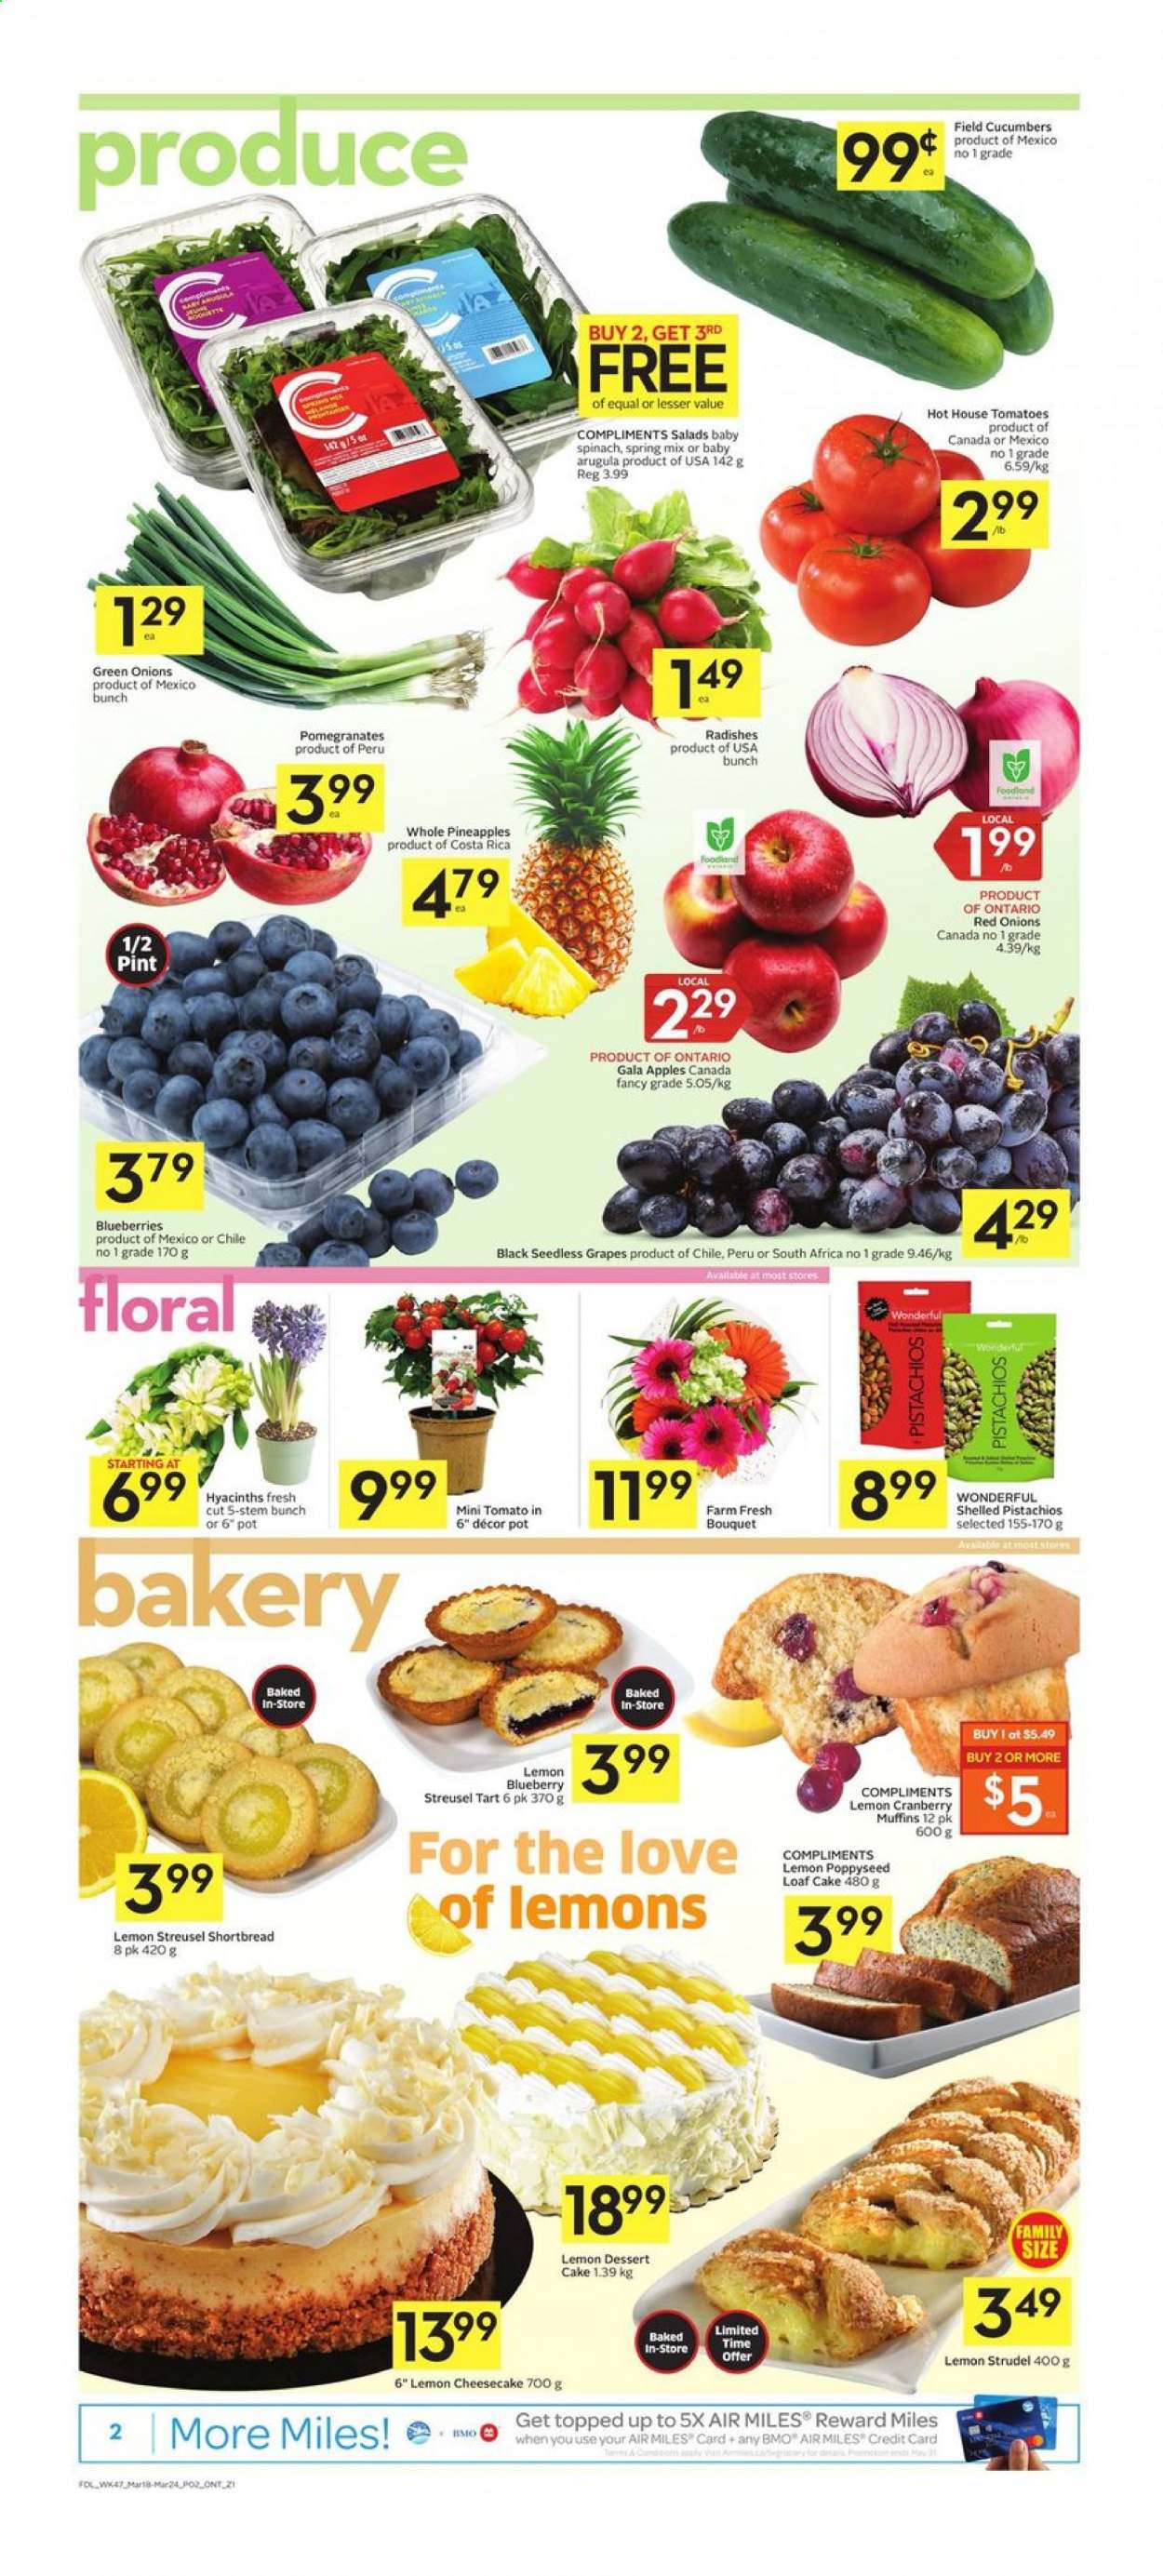 thumbnail - Foodland Flyer - March 18, 2021 - March 24, 2021 - Sales products - cake, tart, strudel, cheesecake, muffin, loaf cake, arugula, cucumber, radishes, red onions, tomatoes, green onion, apples, blueberries, Gala, grapes, seedless grapes, pineapple, pomegranate, pistachios. Page 2.